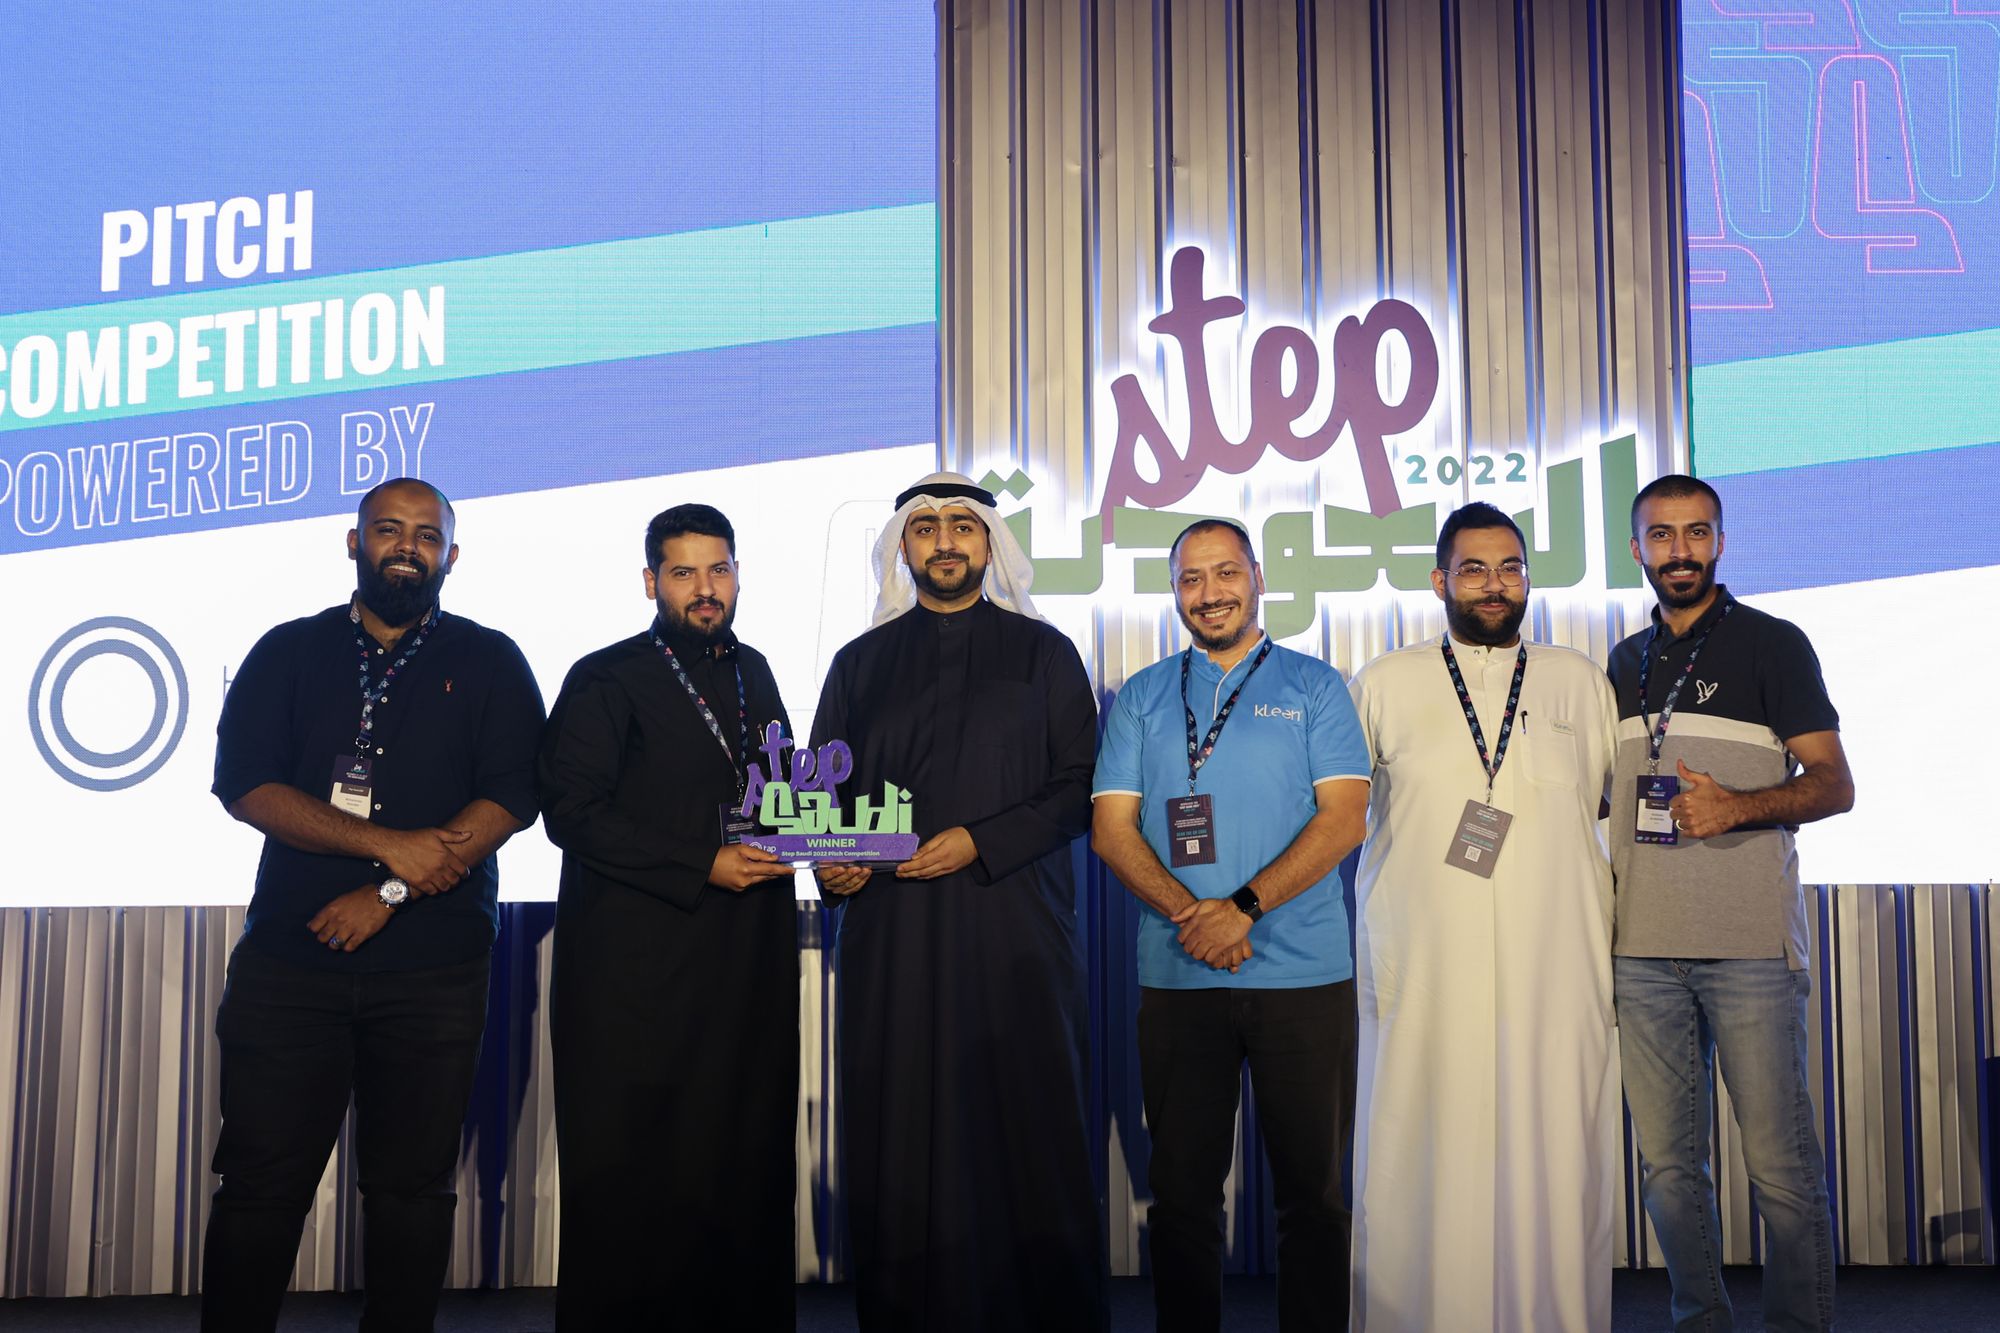 Step Saudi Pitch Competition Winners - Kleen